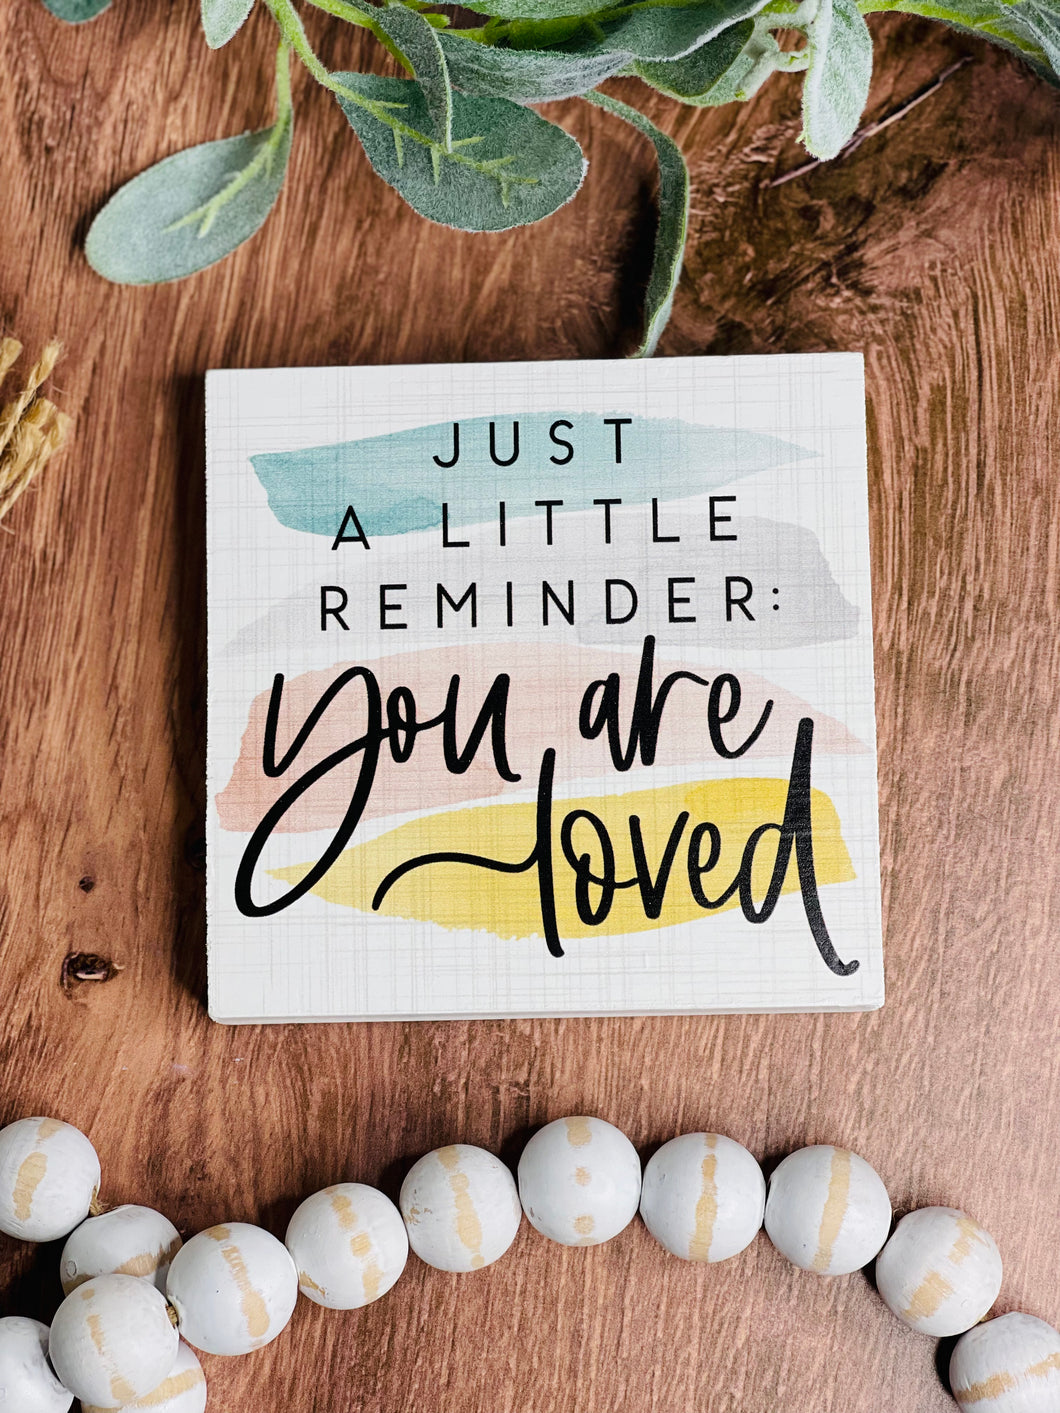 Just a little reminder: You are loved